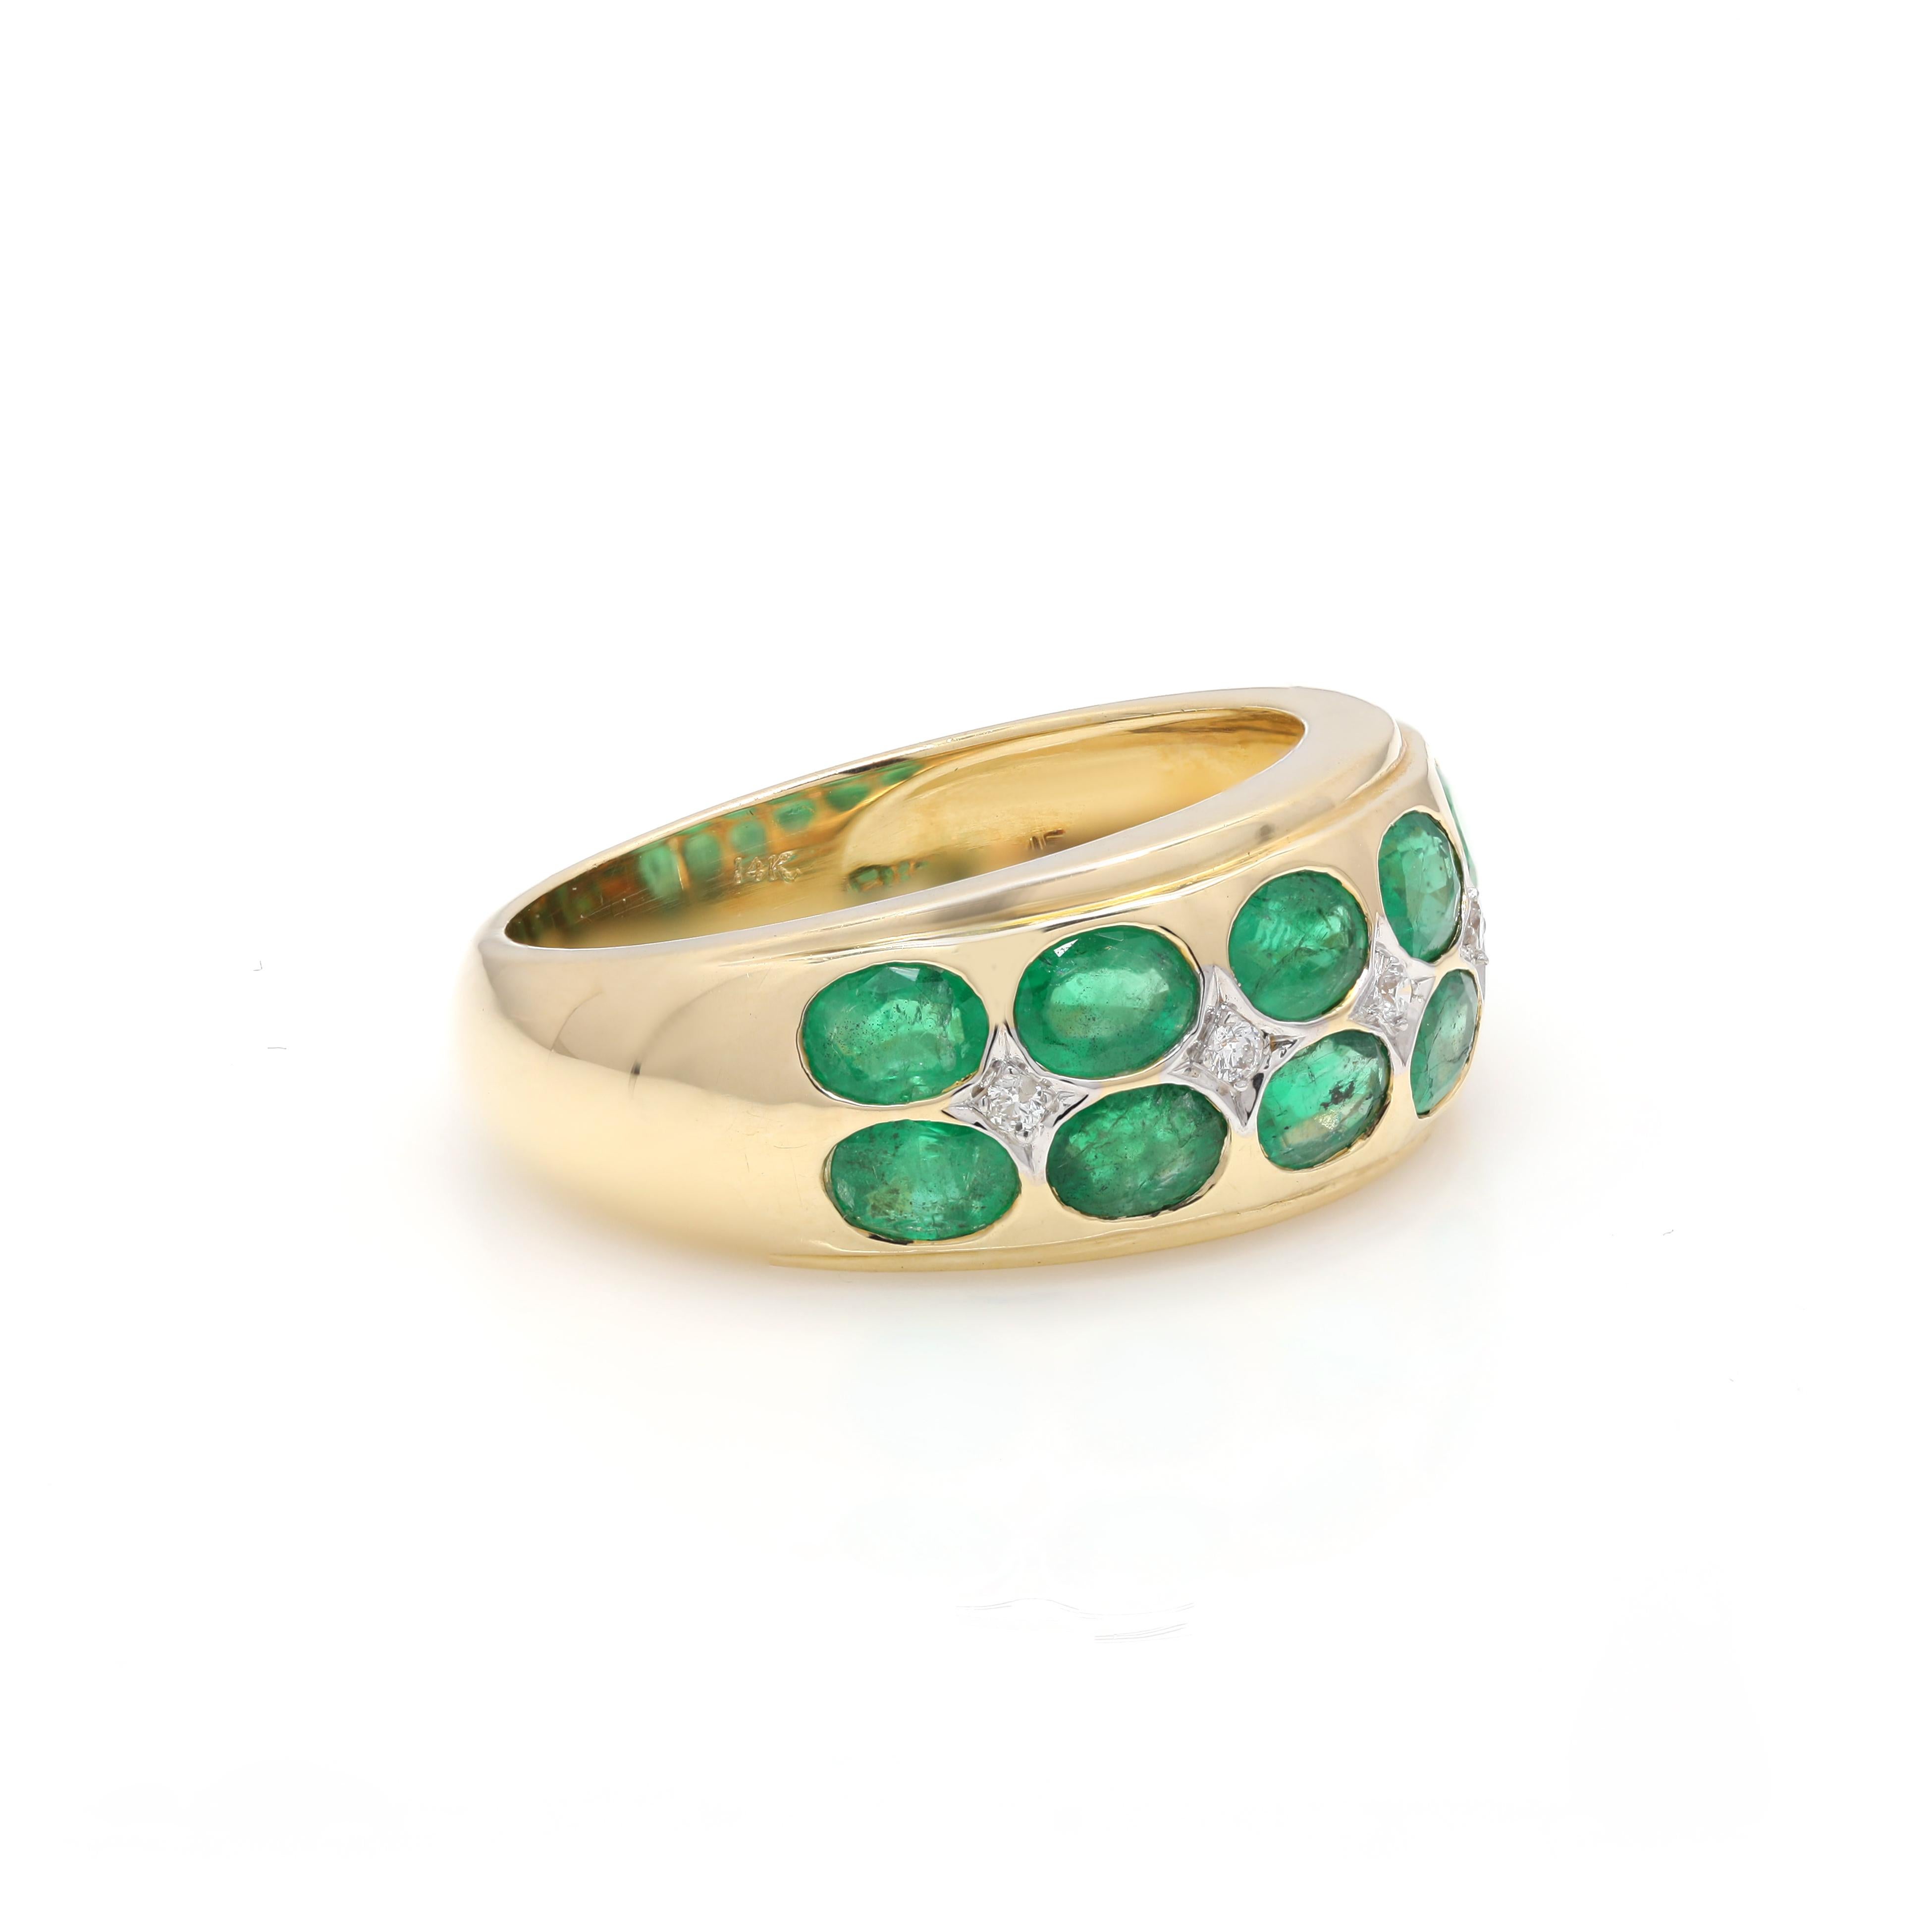 For Sale:  Natural 2.3 ct Emerald Band Ring with Diamonds Inlaid in 14K Yellow Gold 4